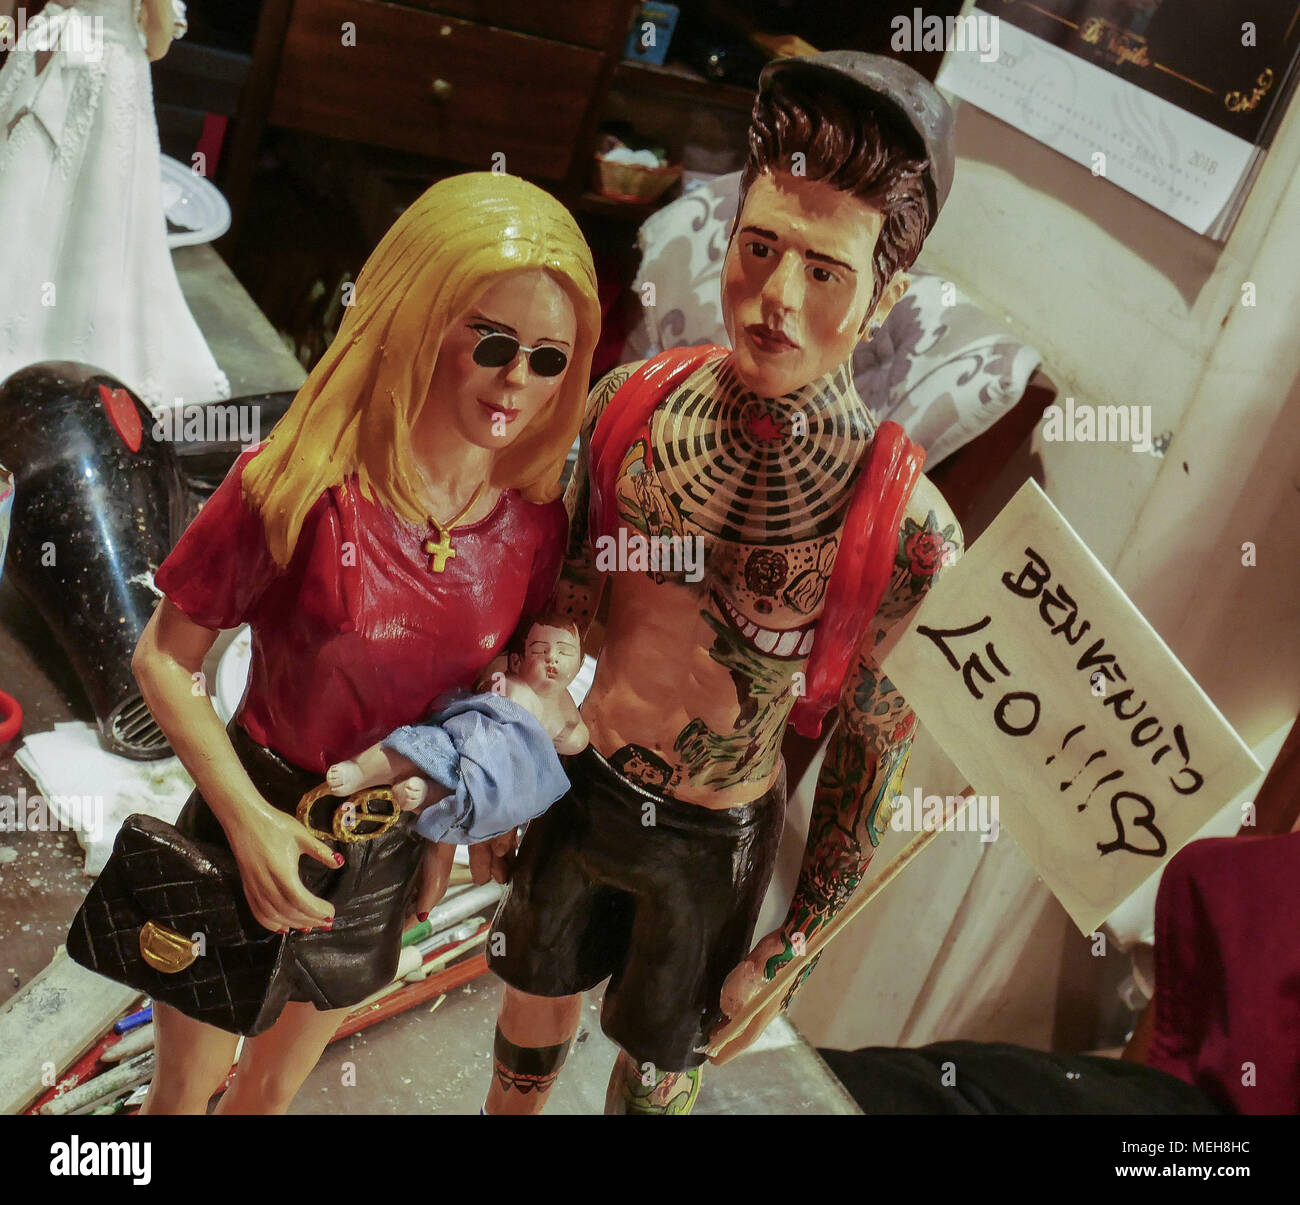 Genny Di Virgilio has created figurines of the rapper Fedez and the blogger  Chiara Ferragni with their baby Leone in her arms Featuring: Atmosphere  Where: Naples, Italy When: 20 Mar 2016 Credit: